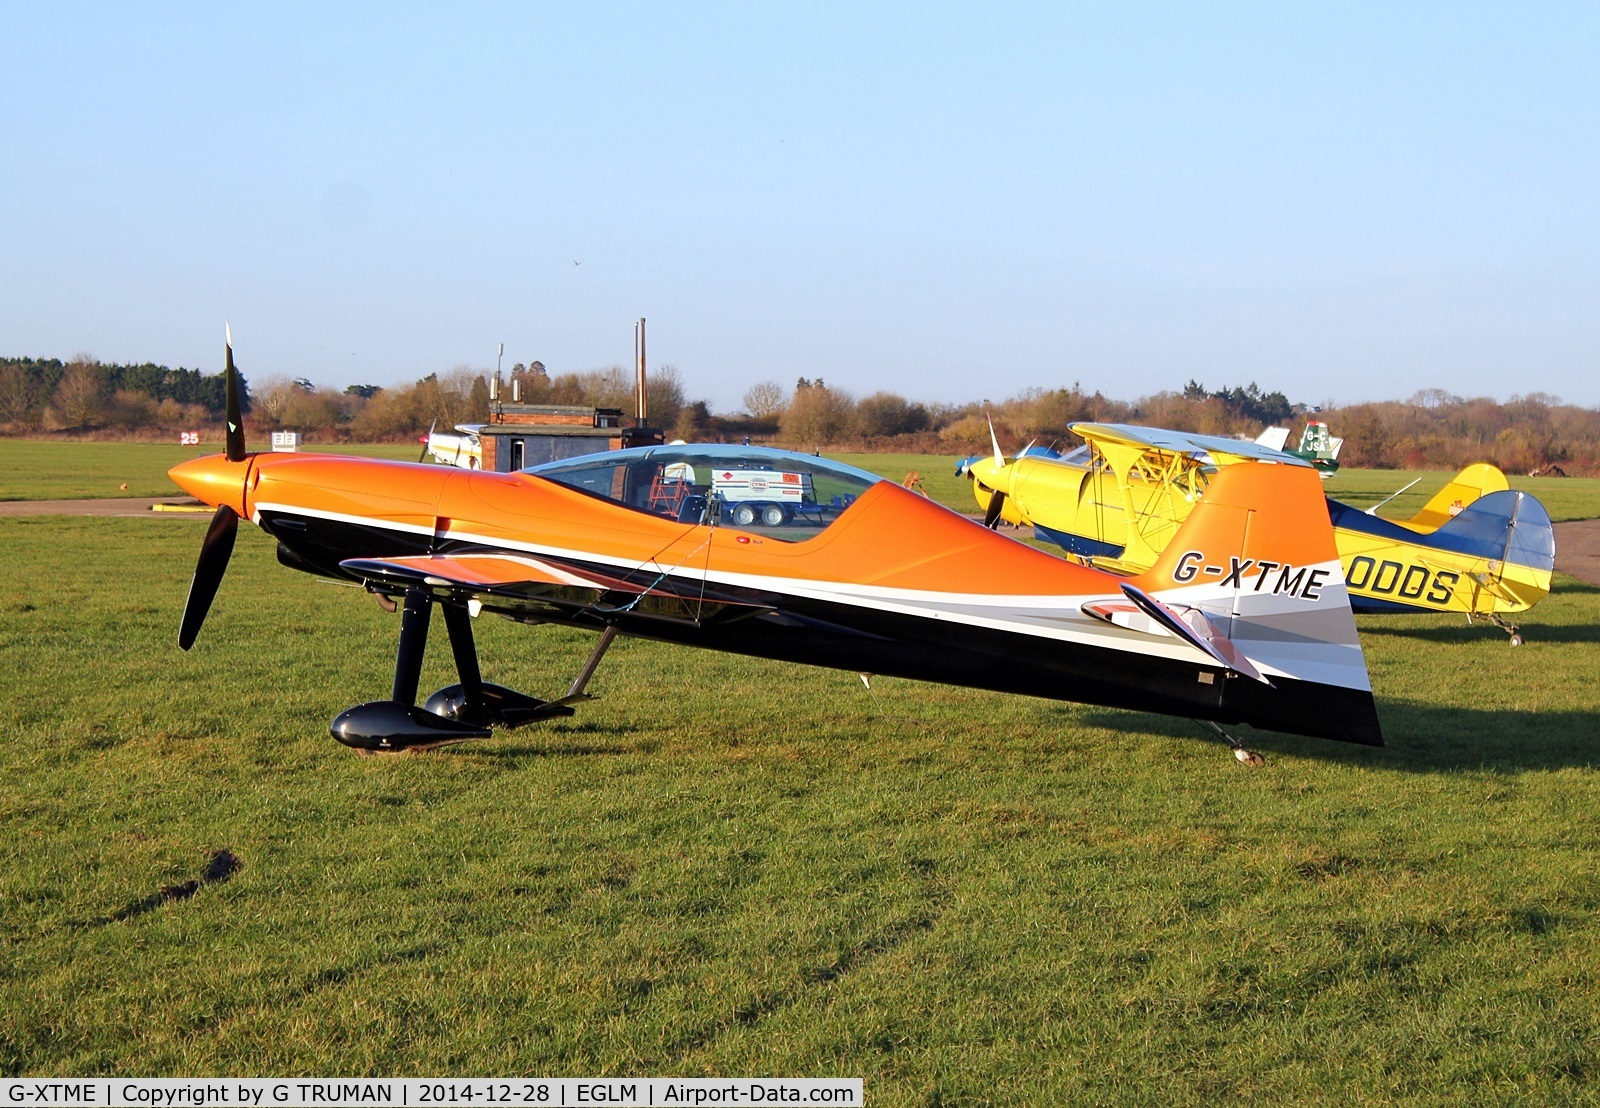 G-XTME, 2011 XtremeAir XA-42 Sbach 342 C/N 110, Parked in the winter sunshine between sorties